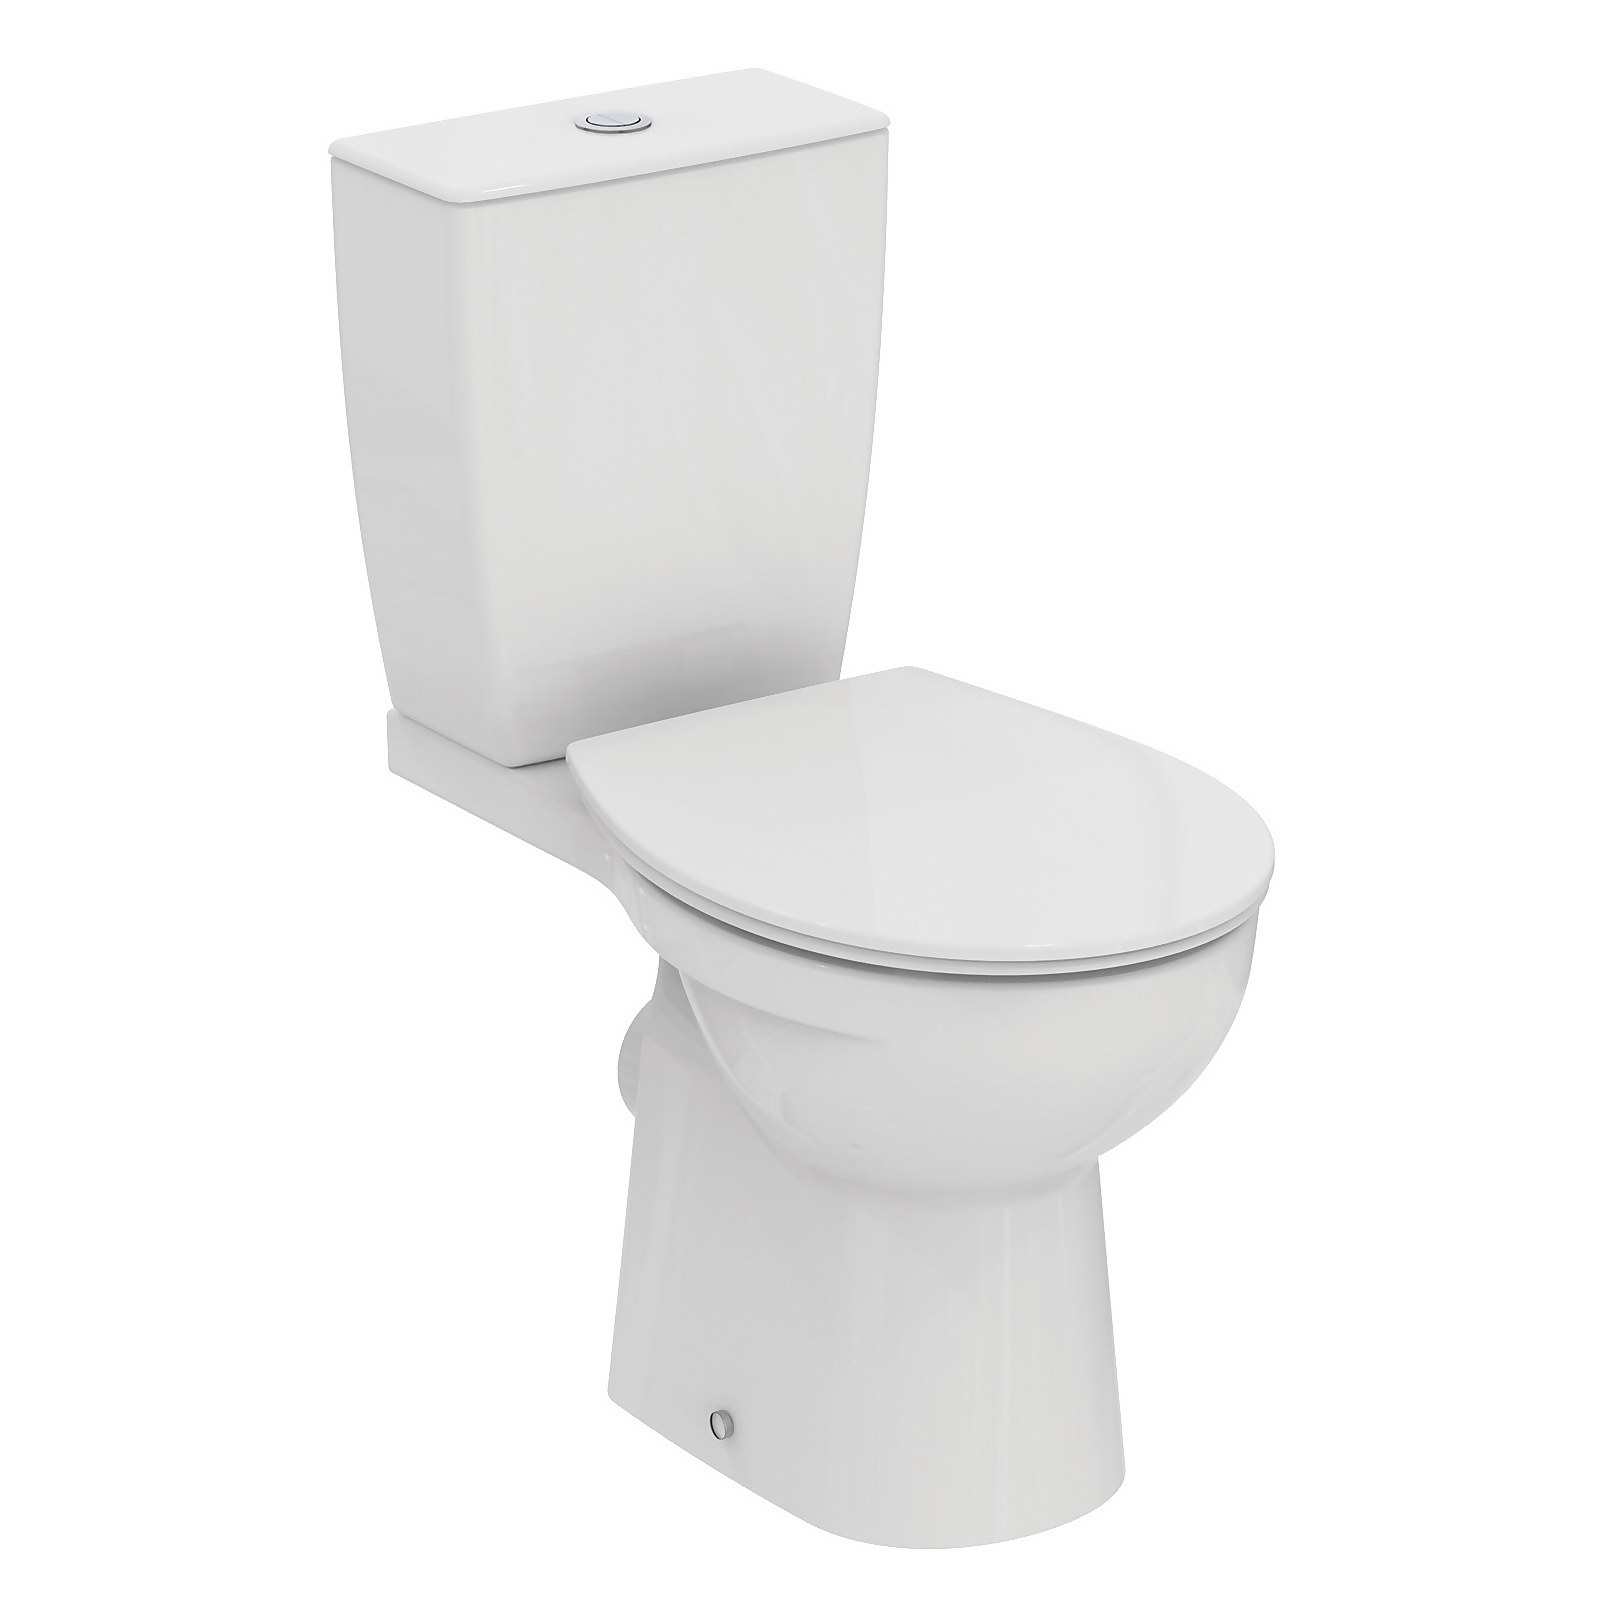 Photo of Ideal Standard Eurovit Close Coupled Toilet Pack